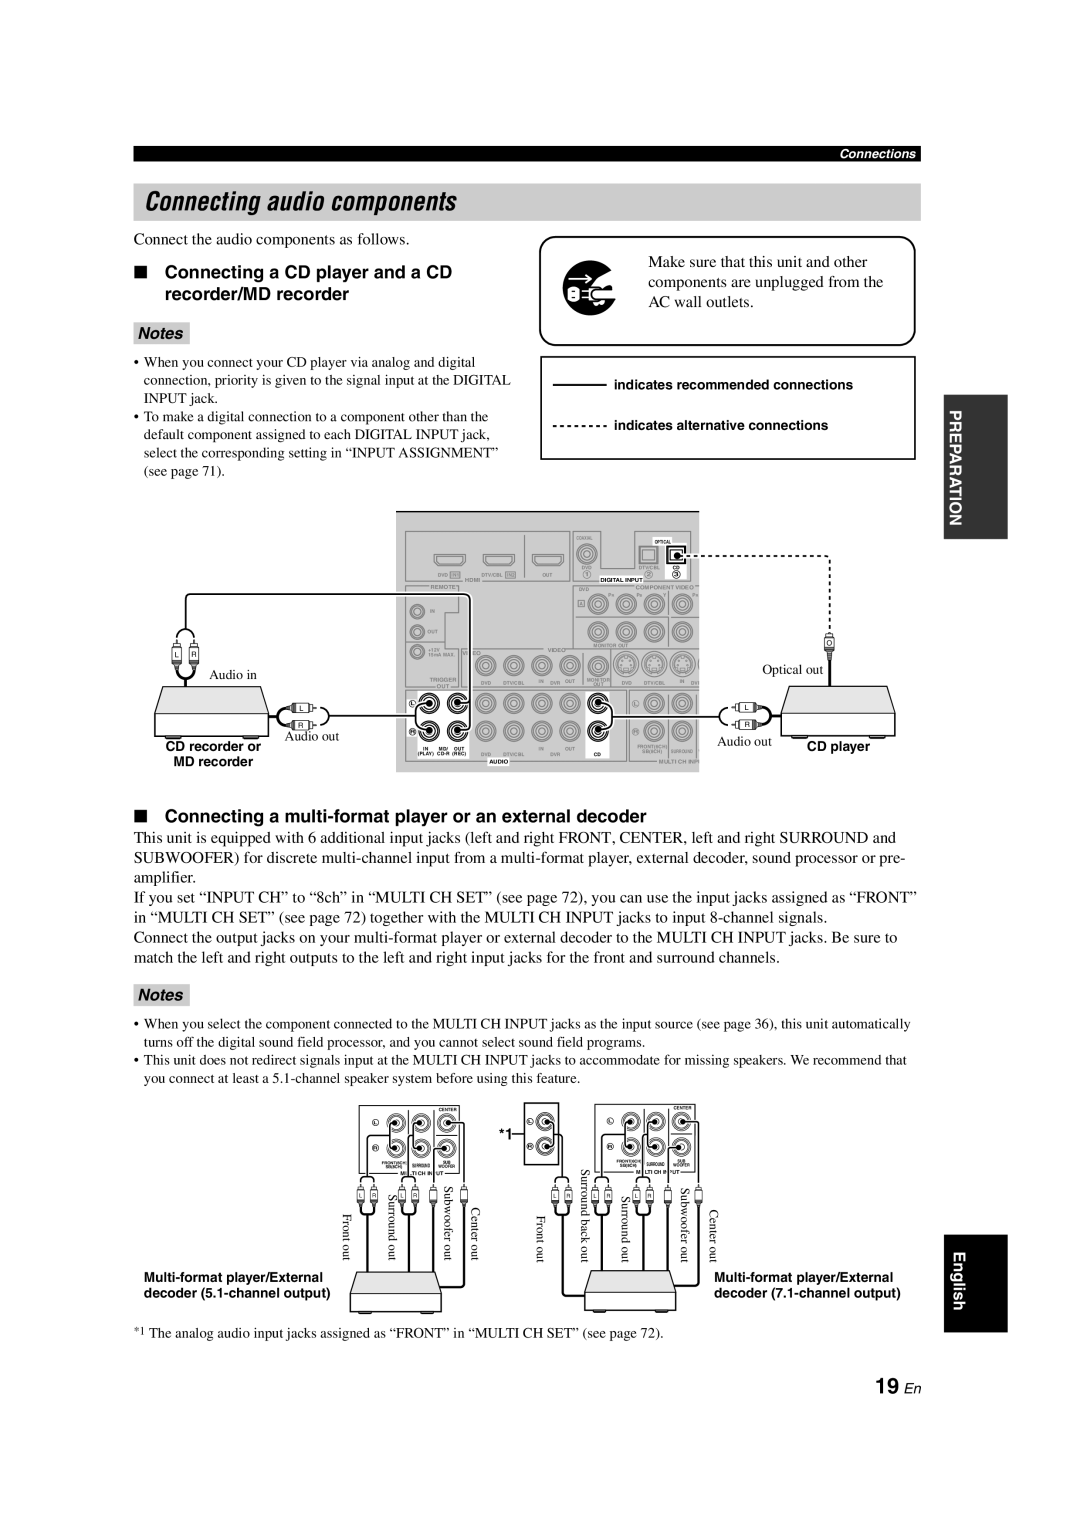 Yamaha RX-V563 owner manual Connecting audio components, 19 En, Connecting a CD player and a CD recorder/MD recorder 